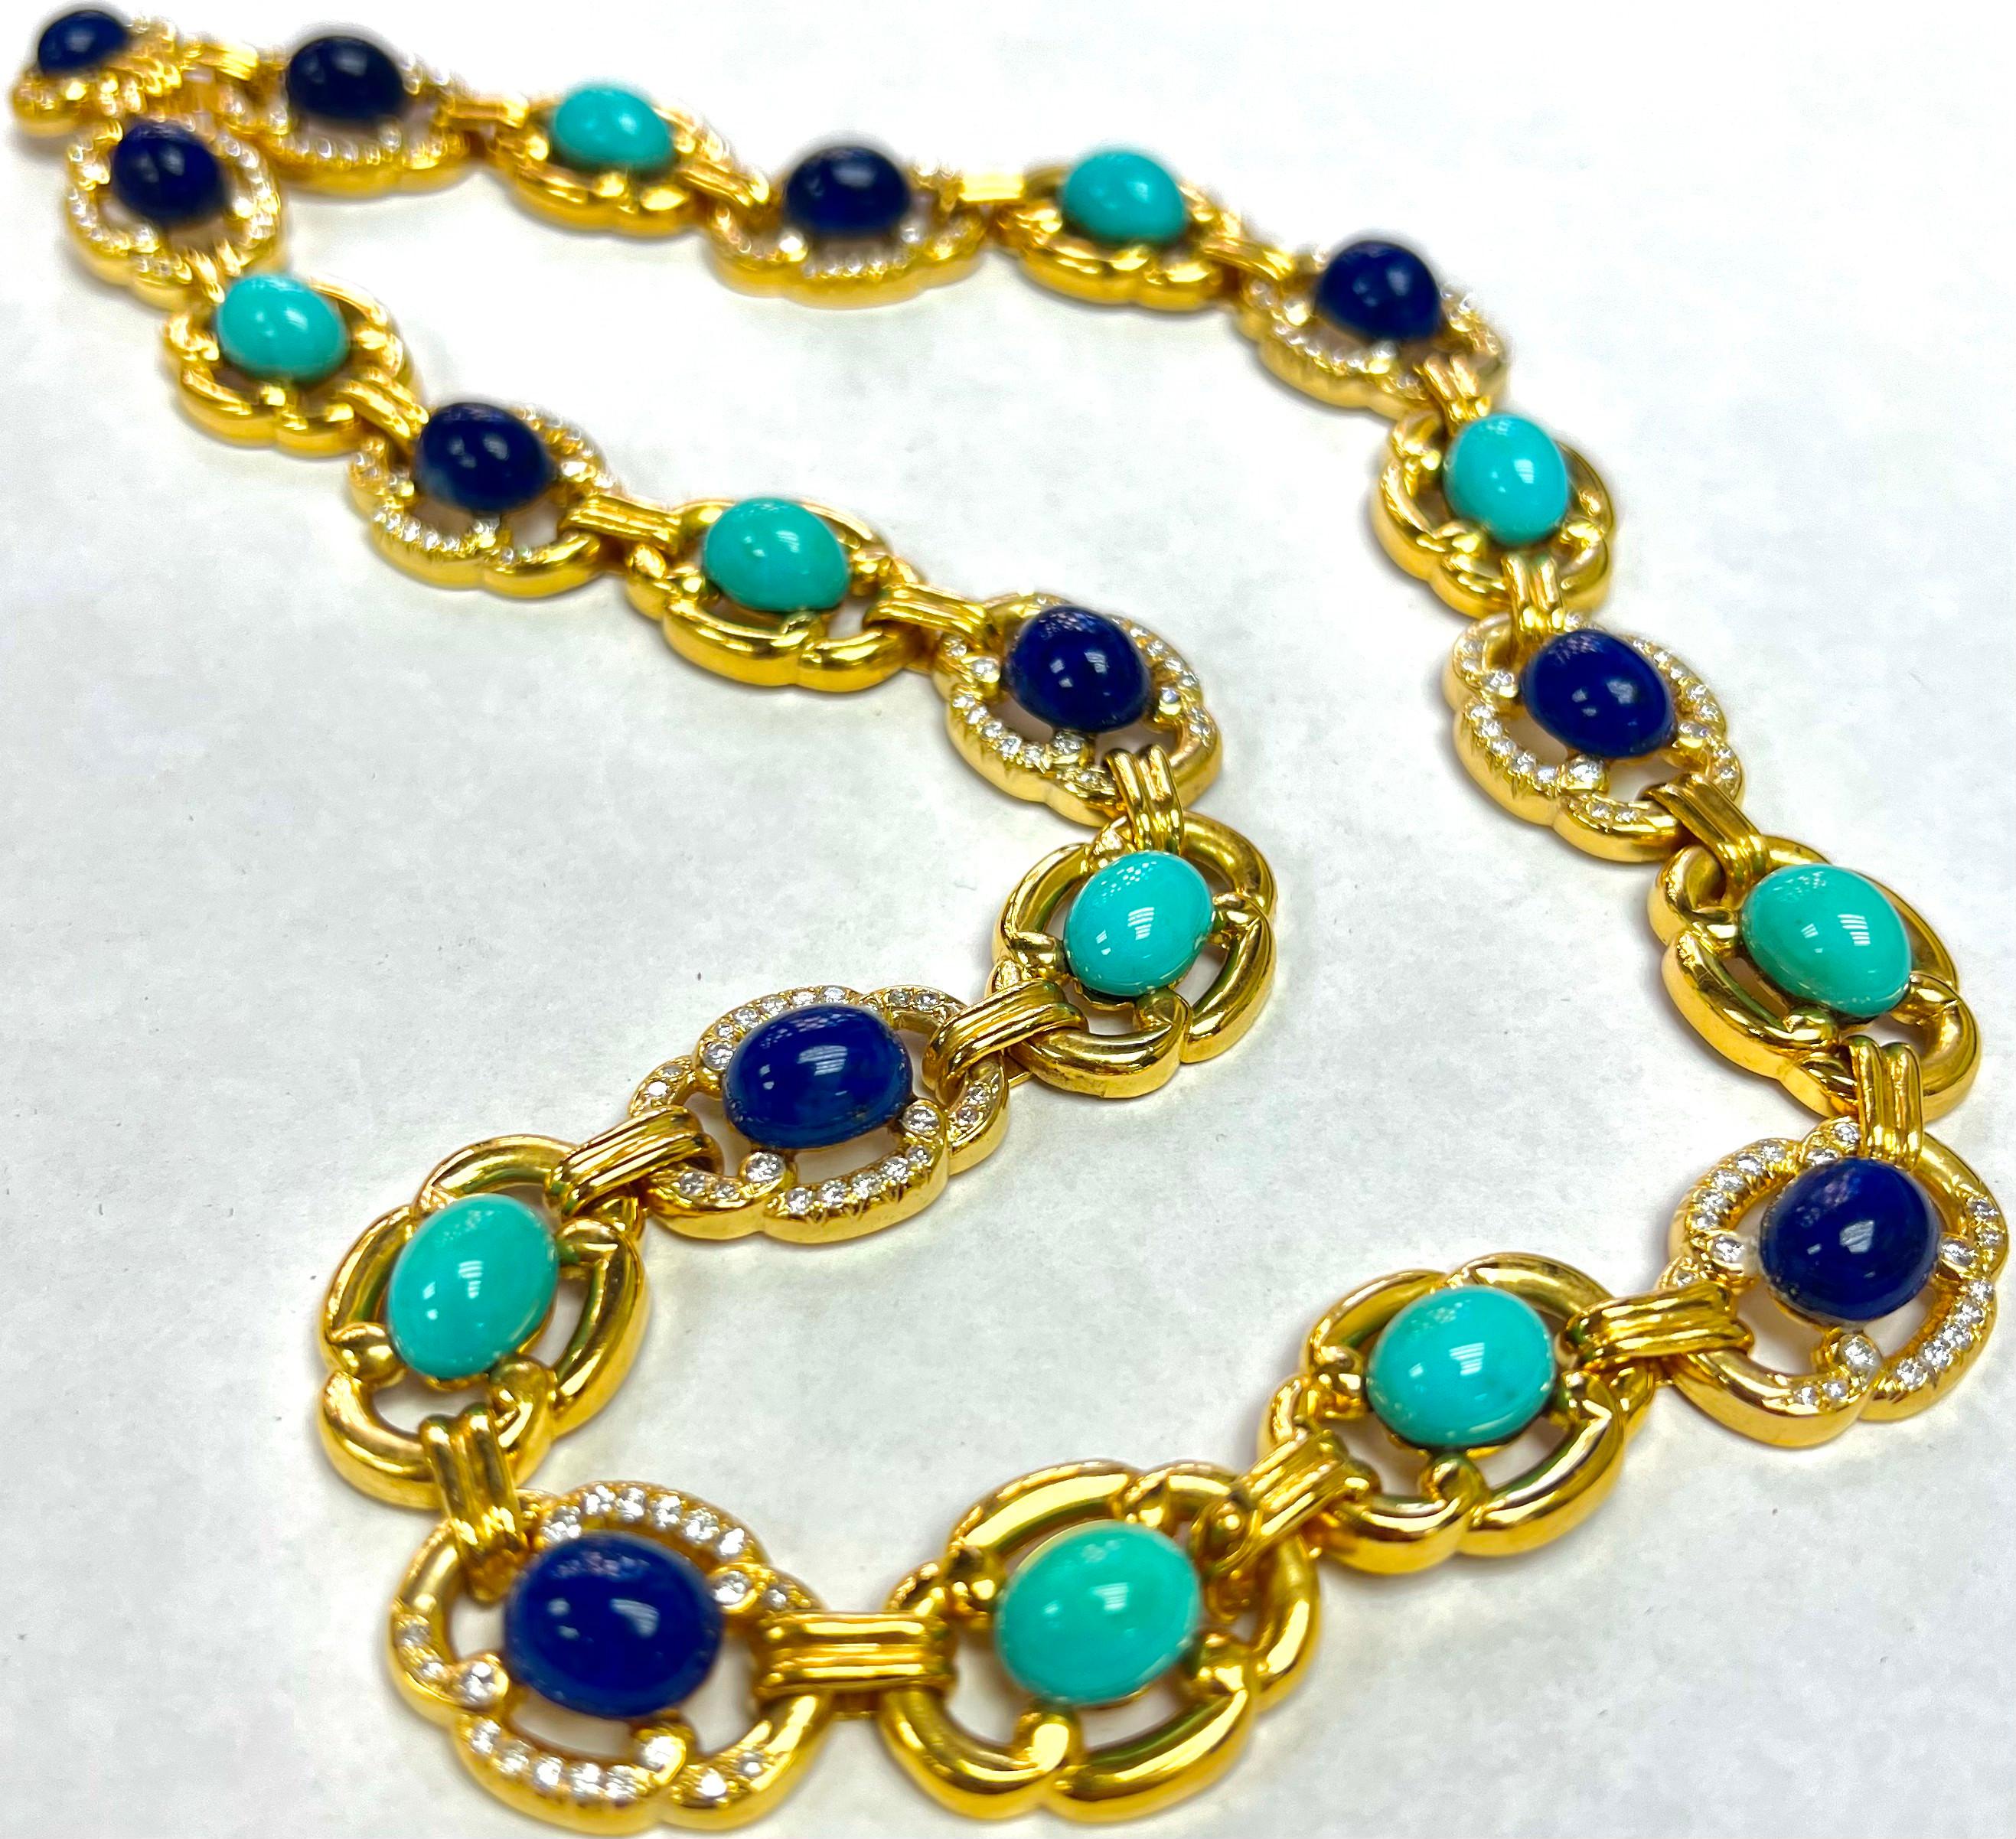 Showcasing a simply beautiful, elegant, and finely detailed yellow gold necklace/brooch, it features 11 perfectly set Lapis stones. Also it has 10 Turquoise Stones with a total carat weight of 43.08. Lastly it has 234 round diamonds, 5.68 total